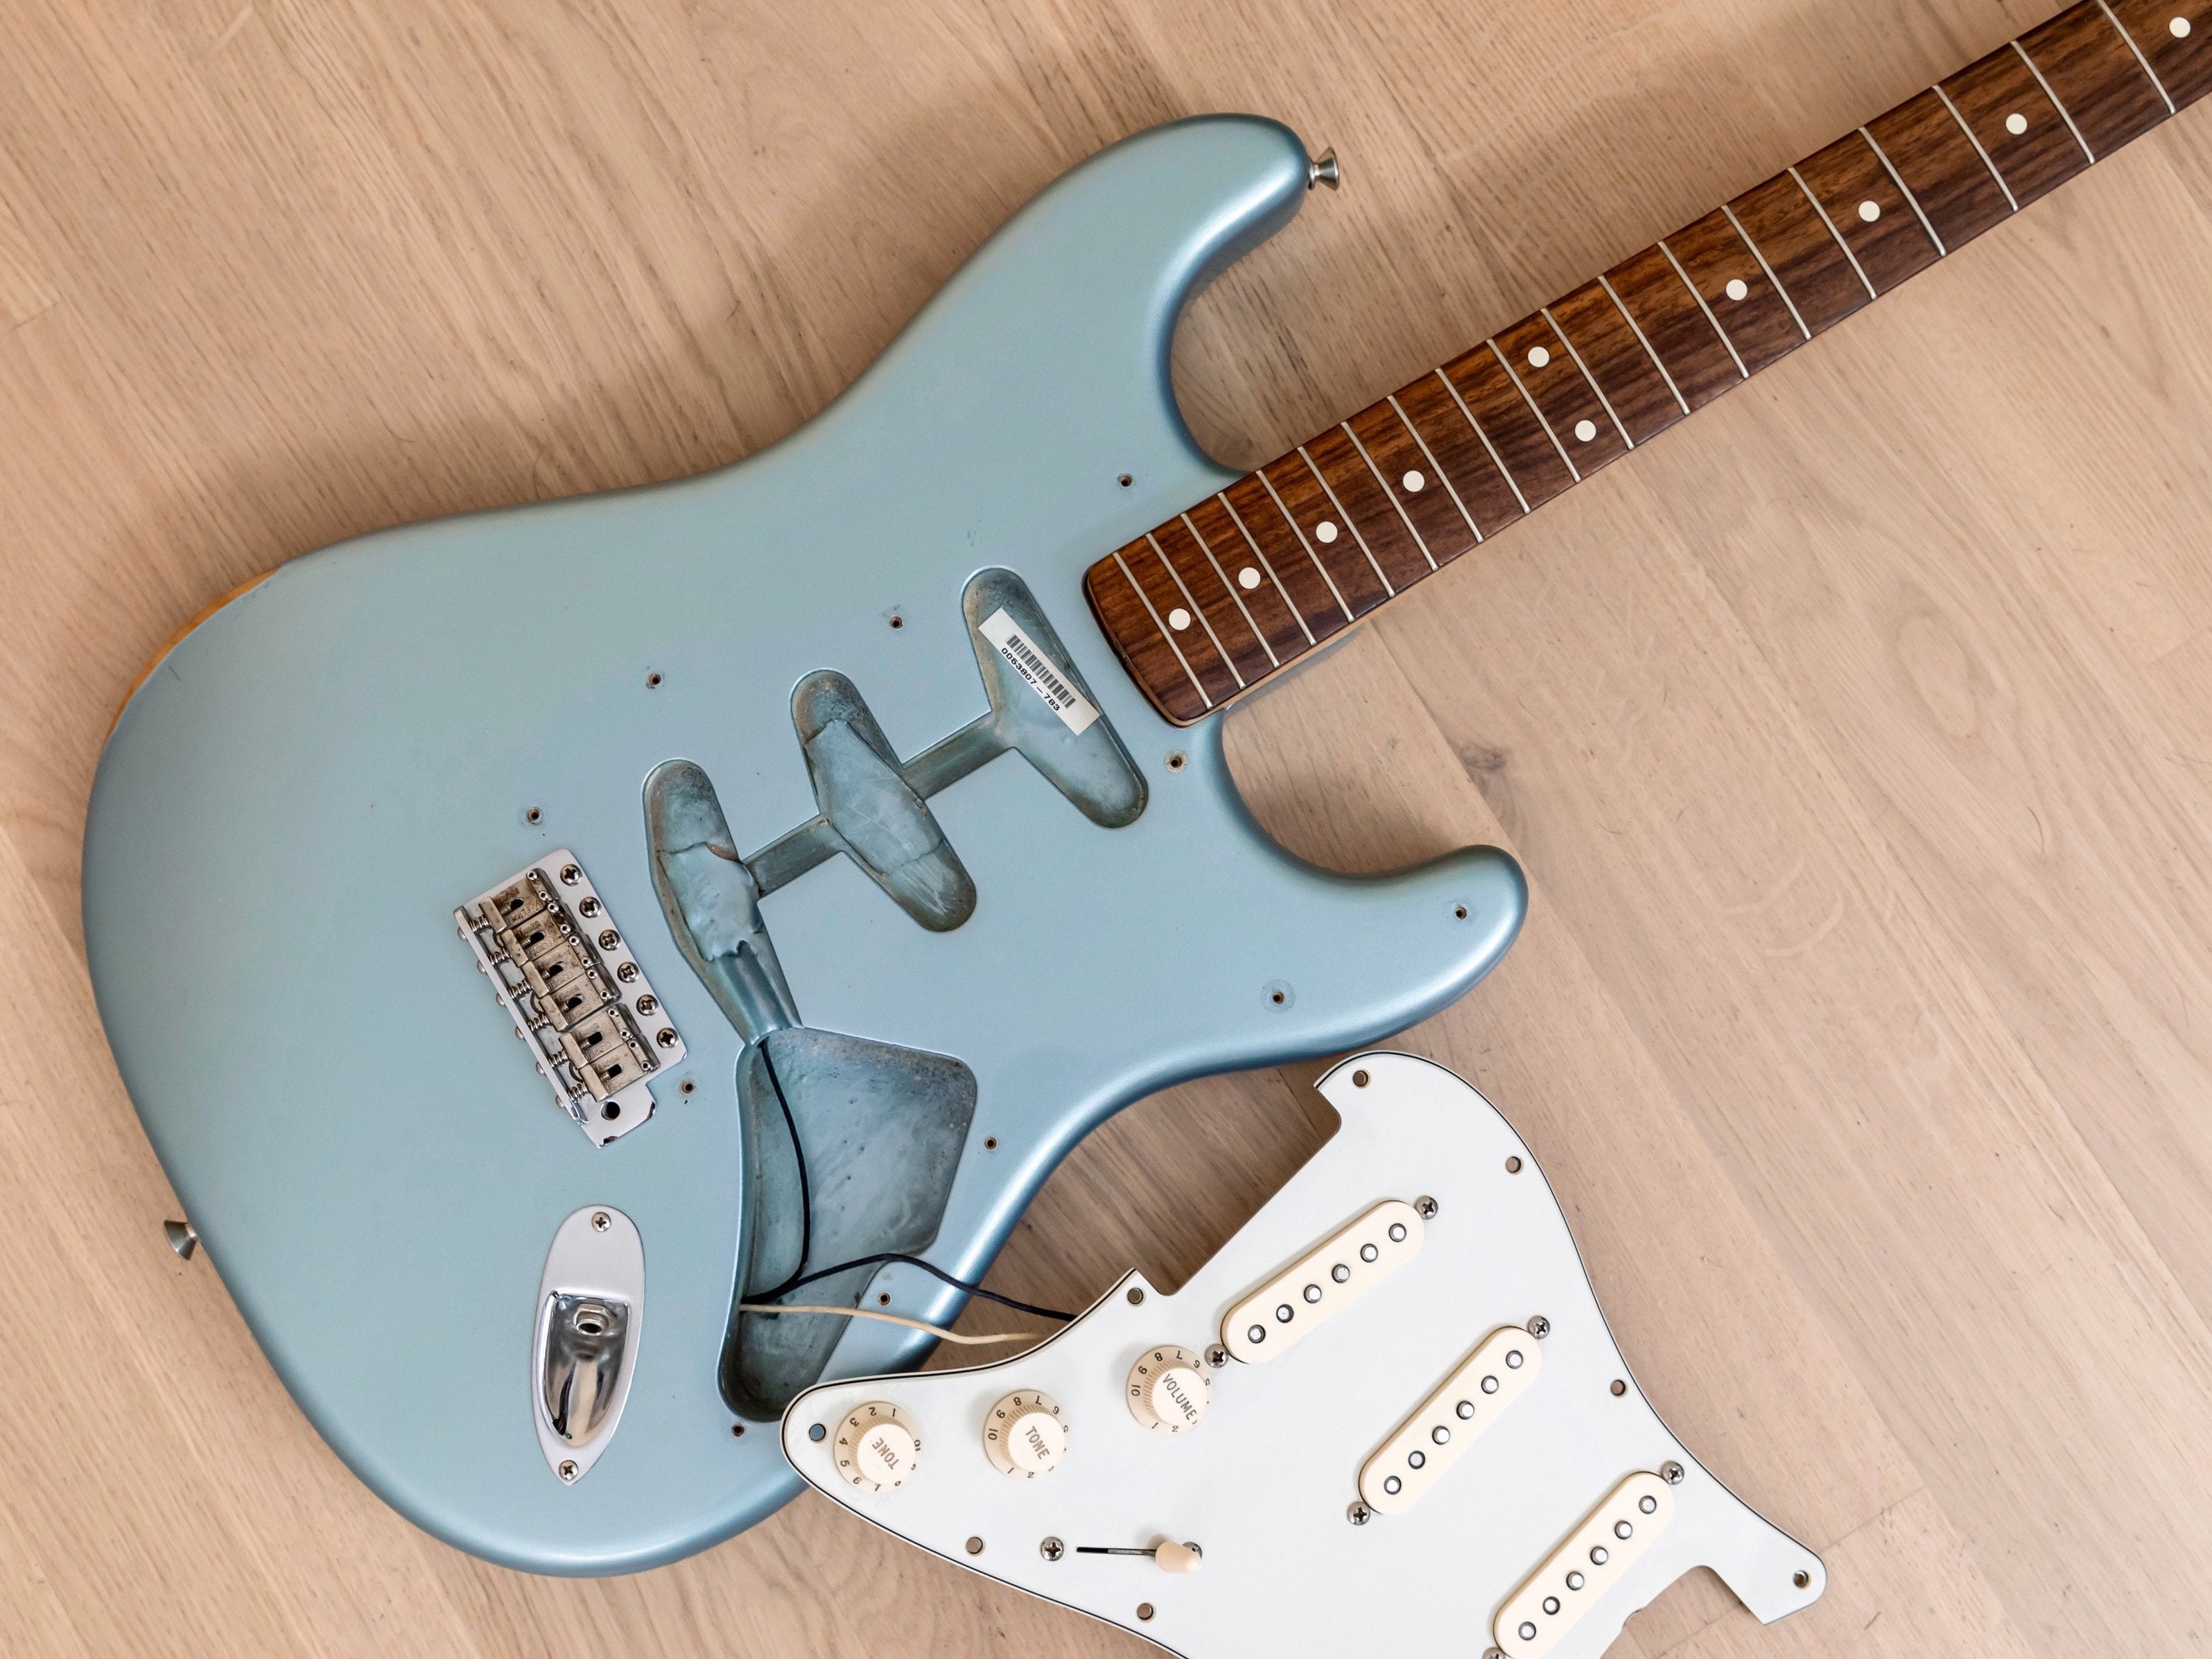 2001 Fender American Vintage '62 Stratocaster Ice Blue w/ Matching Headstock, 1 of 75 Mars Music w/ Case